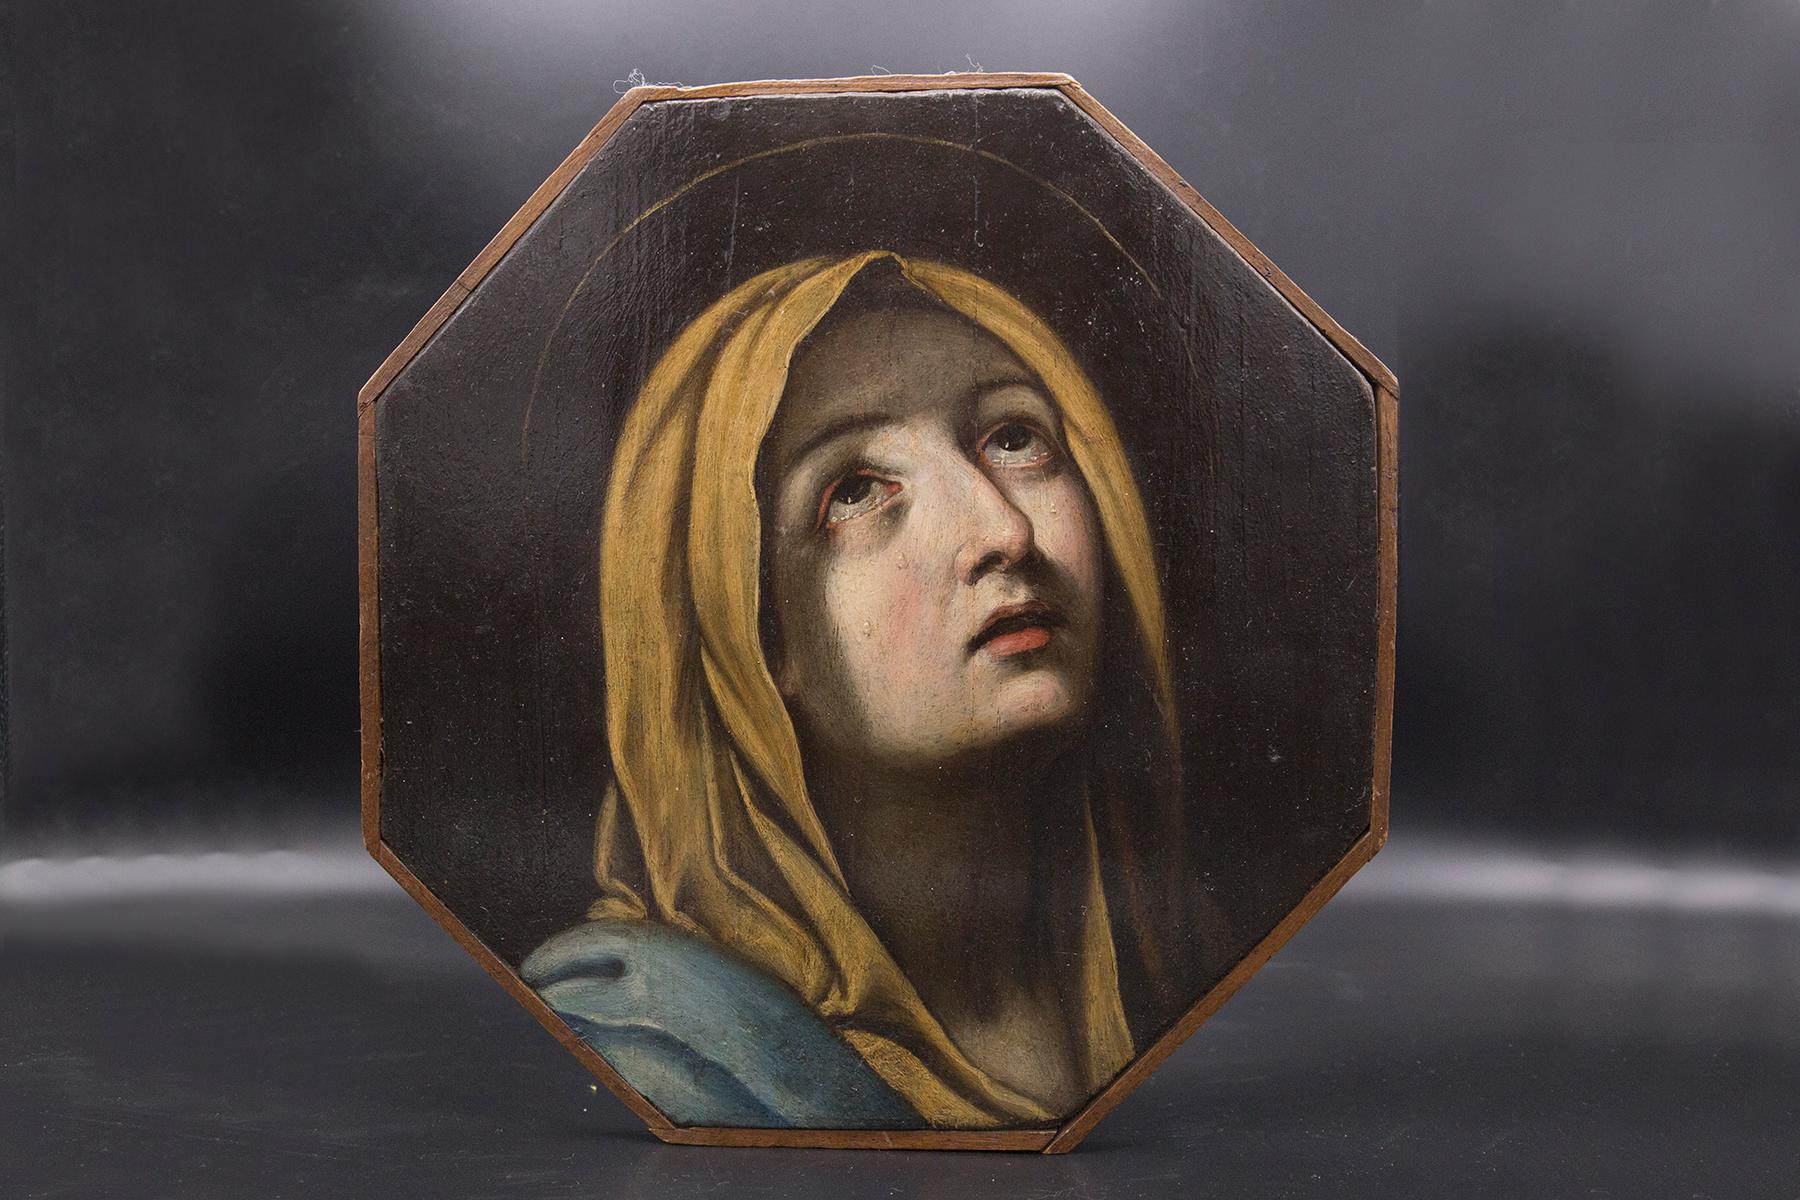 Magnificent 17th century panel painting by Guido Reni, fine Italian manufacture.
The painting was made on a hexagonal wooden panel, the frame of which is visible.
The painting is a classic Christian painting: it depicts the Madonna Addolarata,